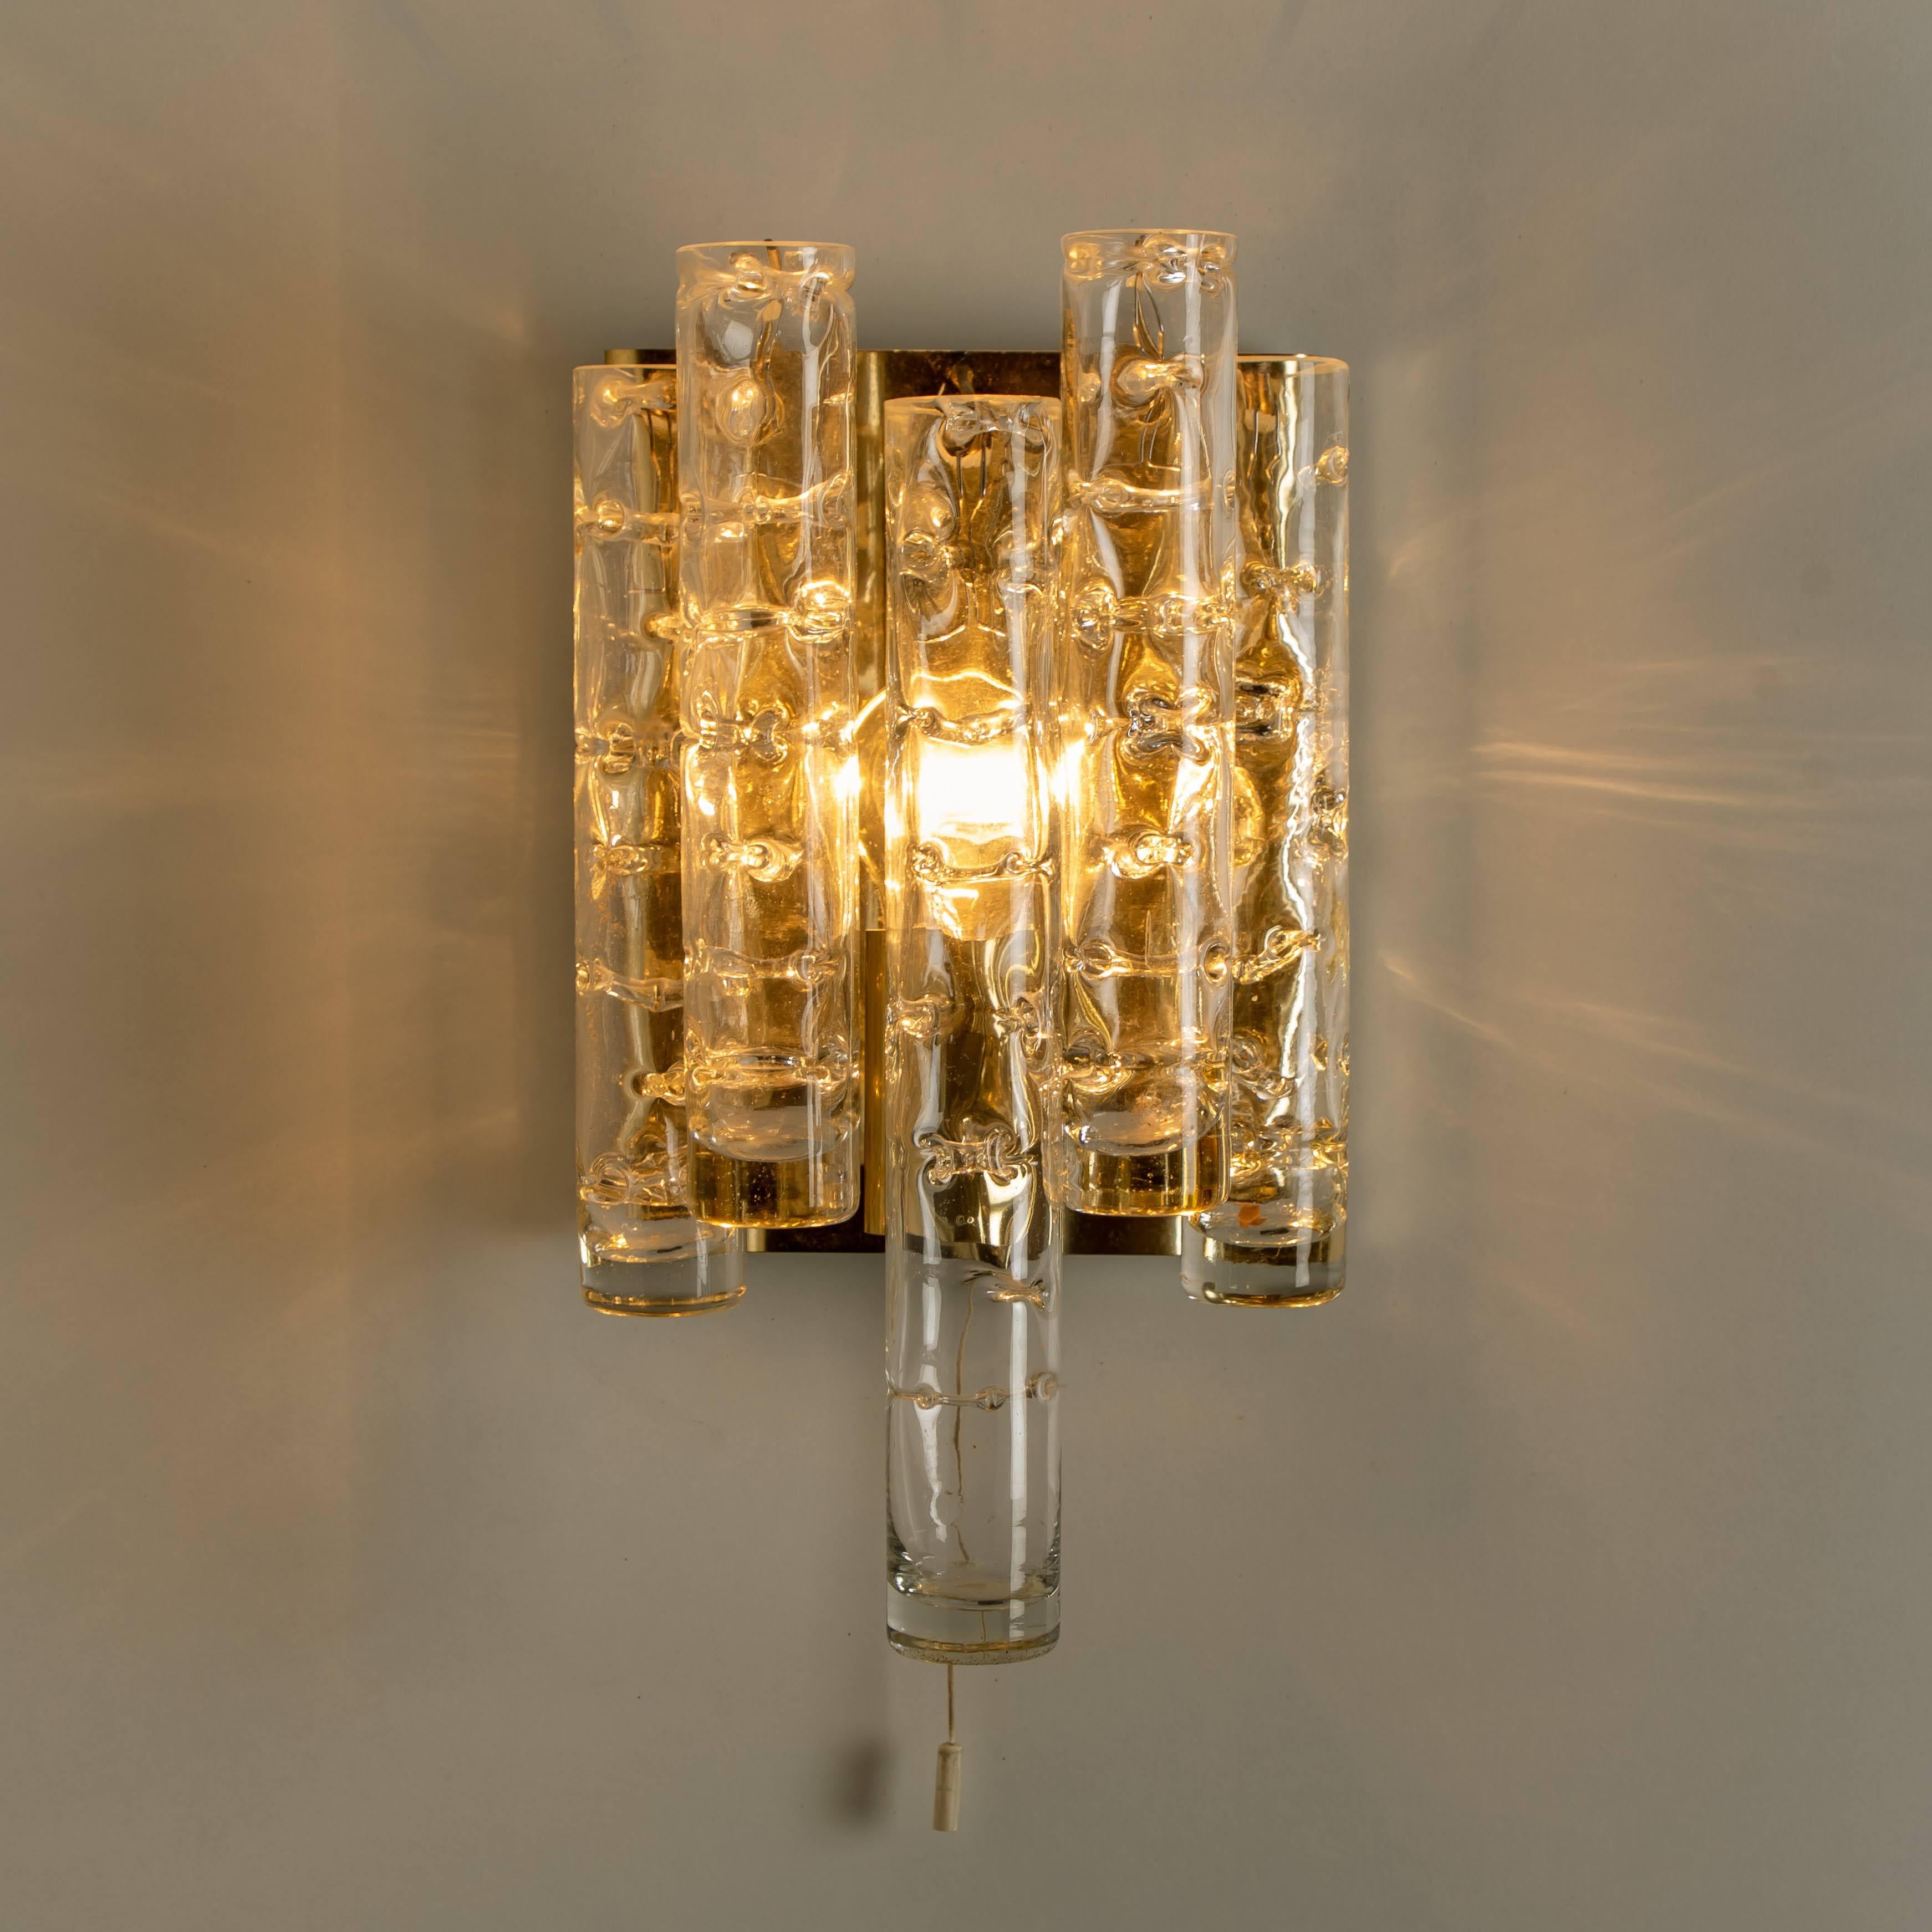 Pair of Doria Wall Lamps in Brass and Glass, 1960s For Sale 1